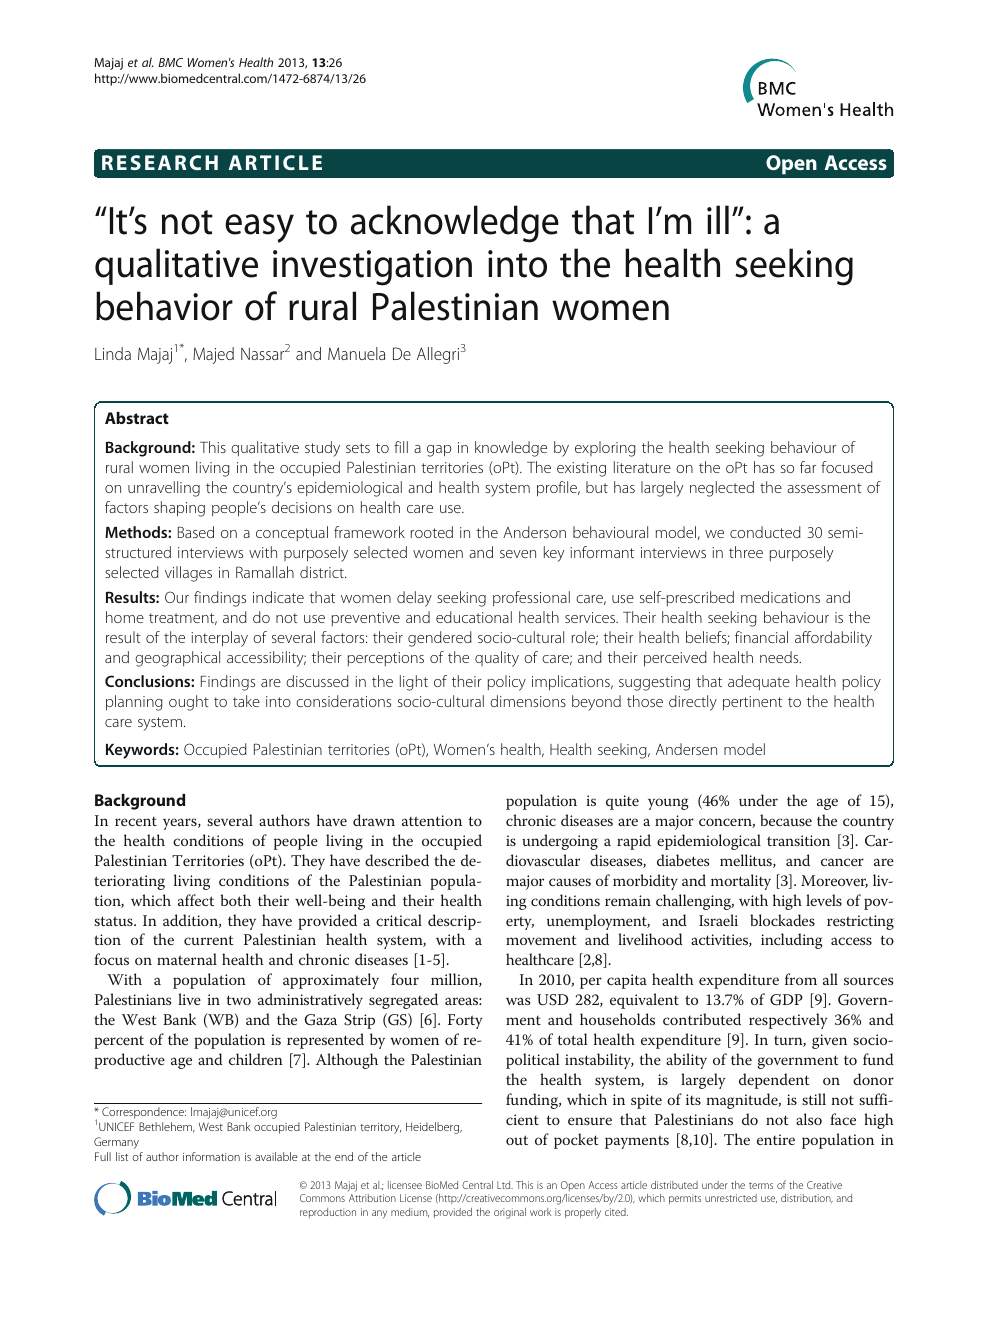 Its not easy to acknowledge that Im ill” a qualitative investigation into the health seeking behavior of rural Palestinian women photo